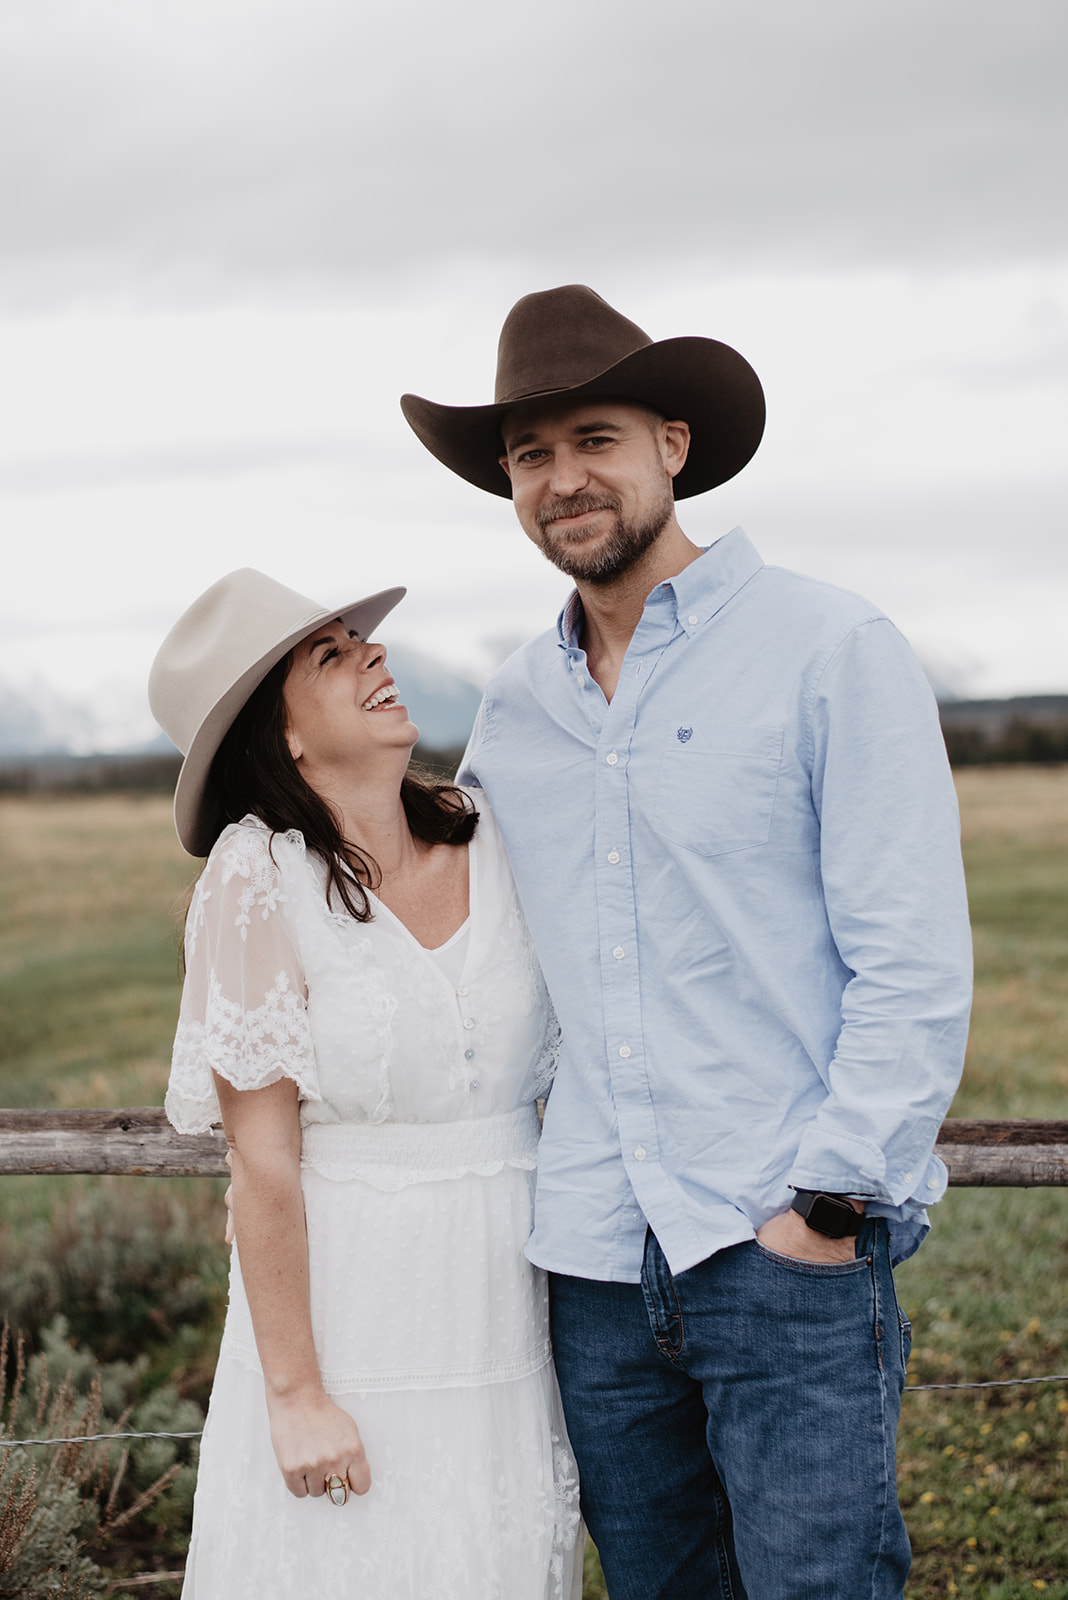 husband and wife wearing cowboy hats as the wife giggles and looks up at her husband